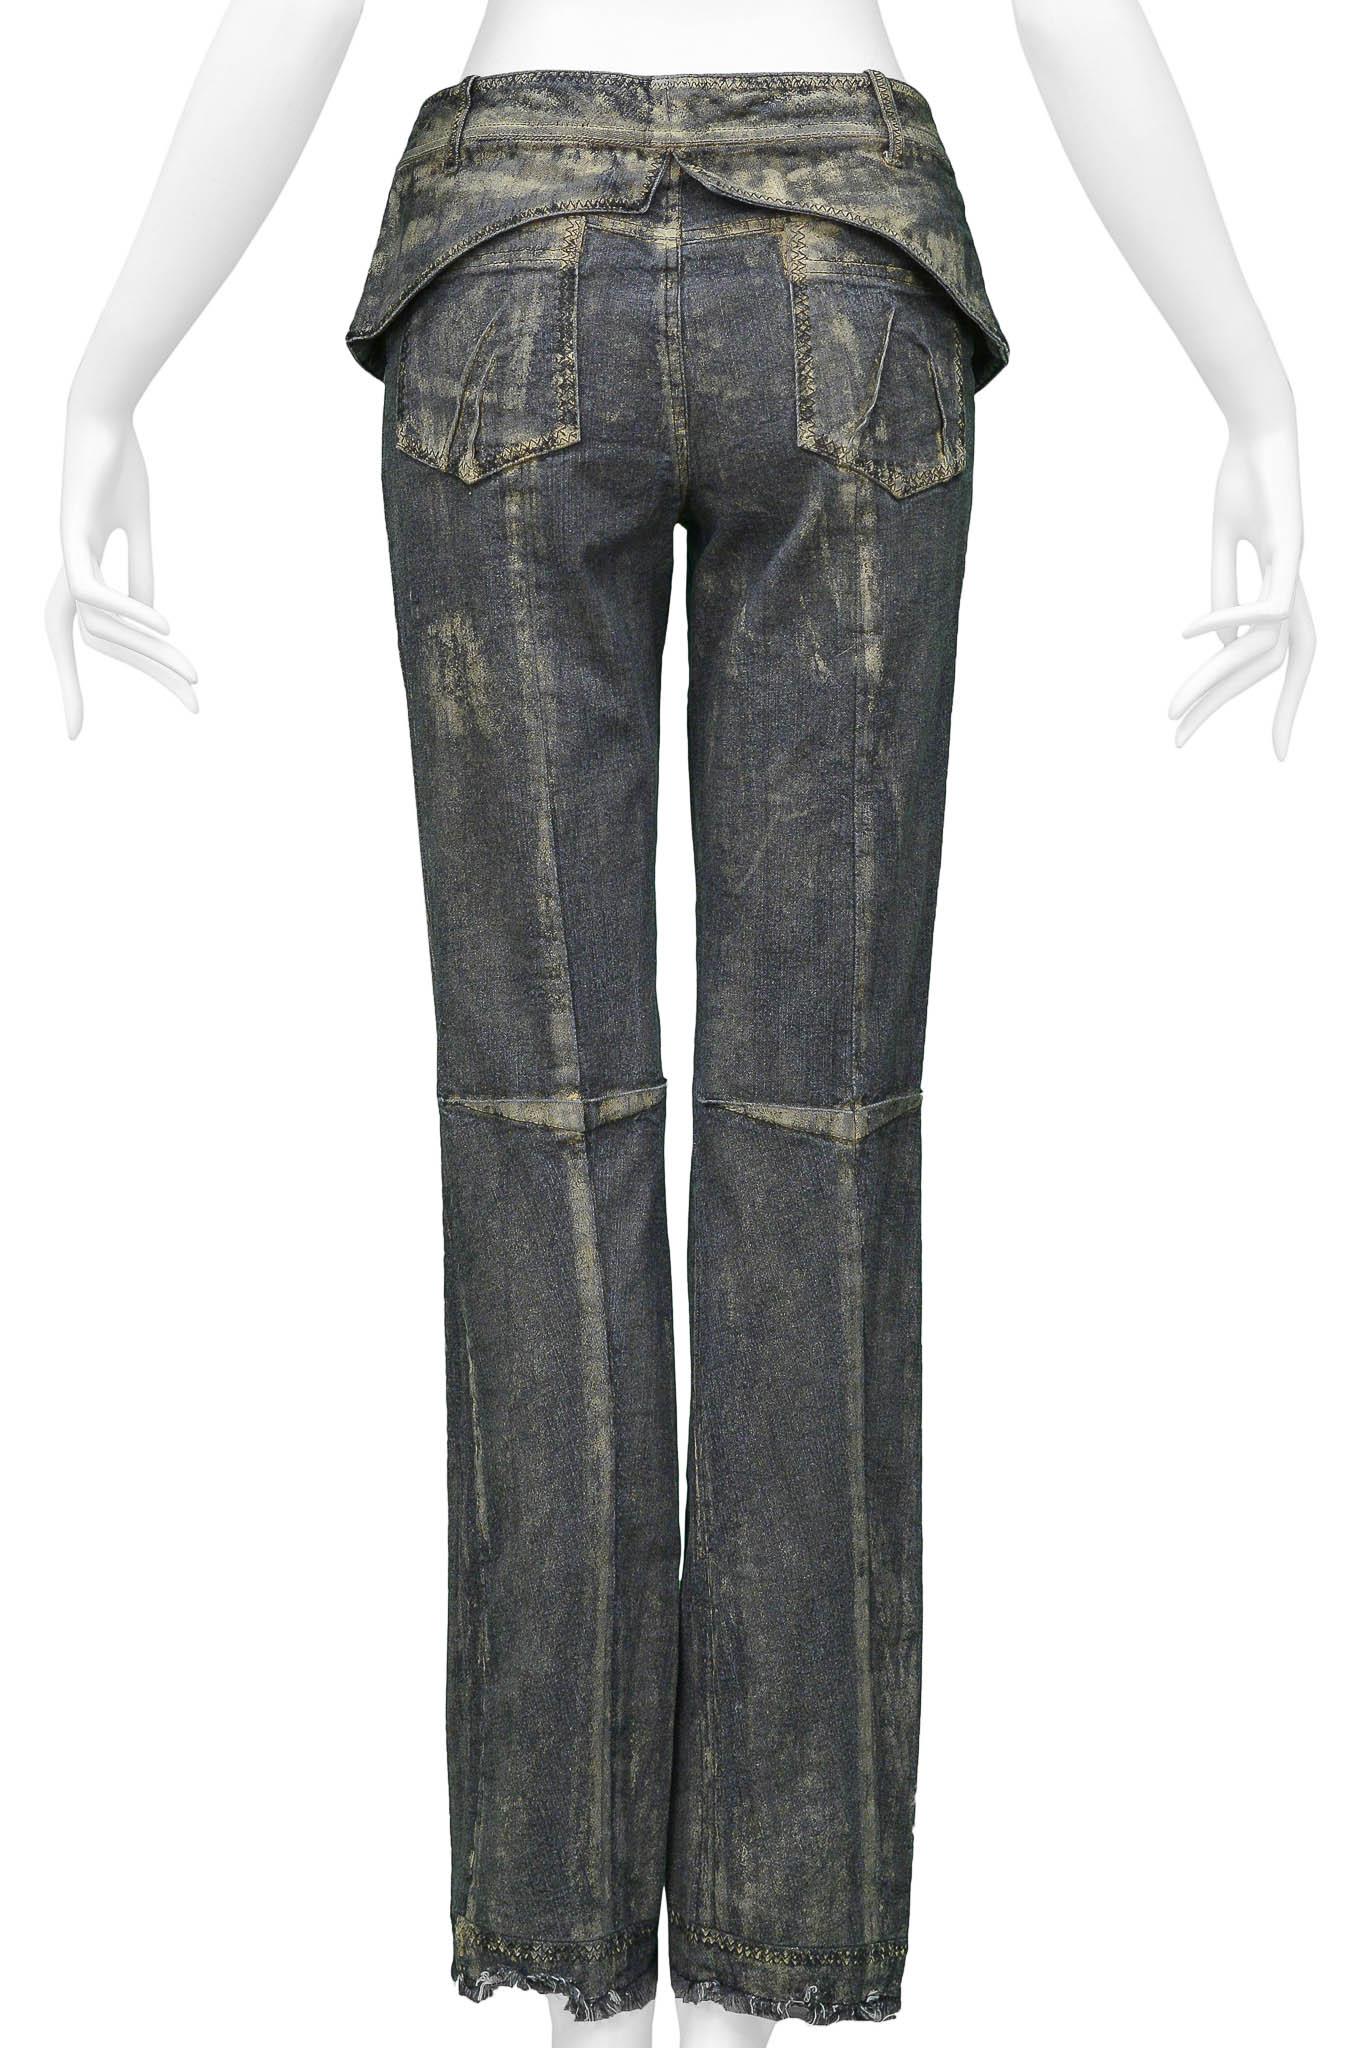 Christian Dior Grey Denim Jeans With Gold Wax 2006 For Sale 2